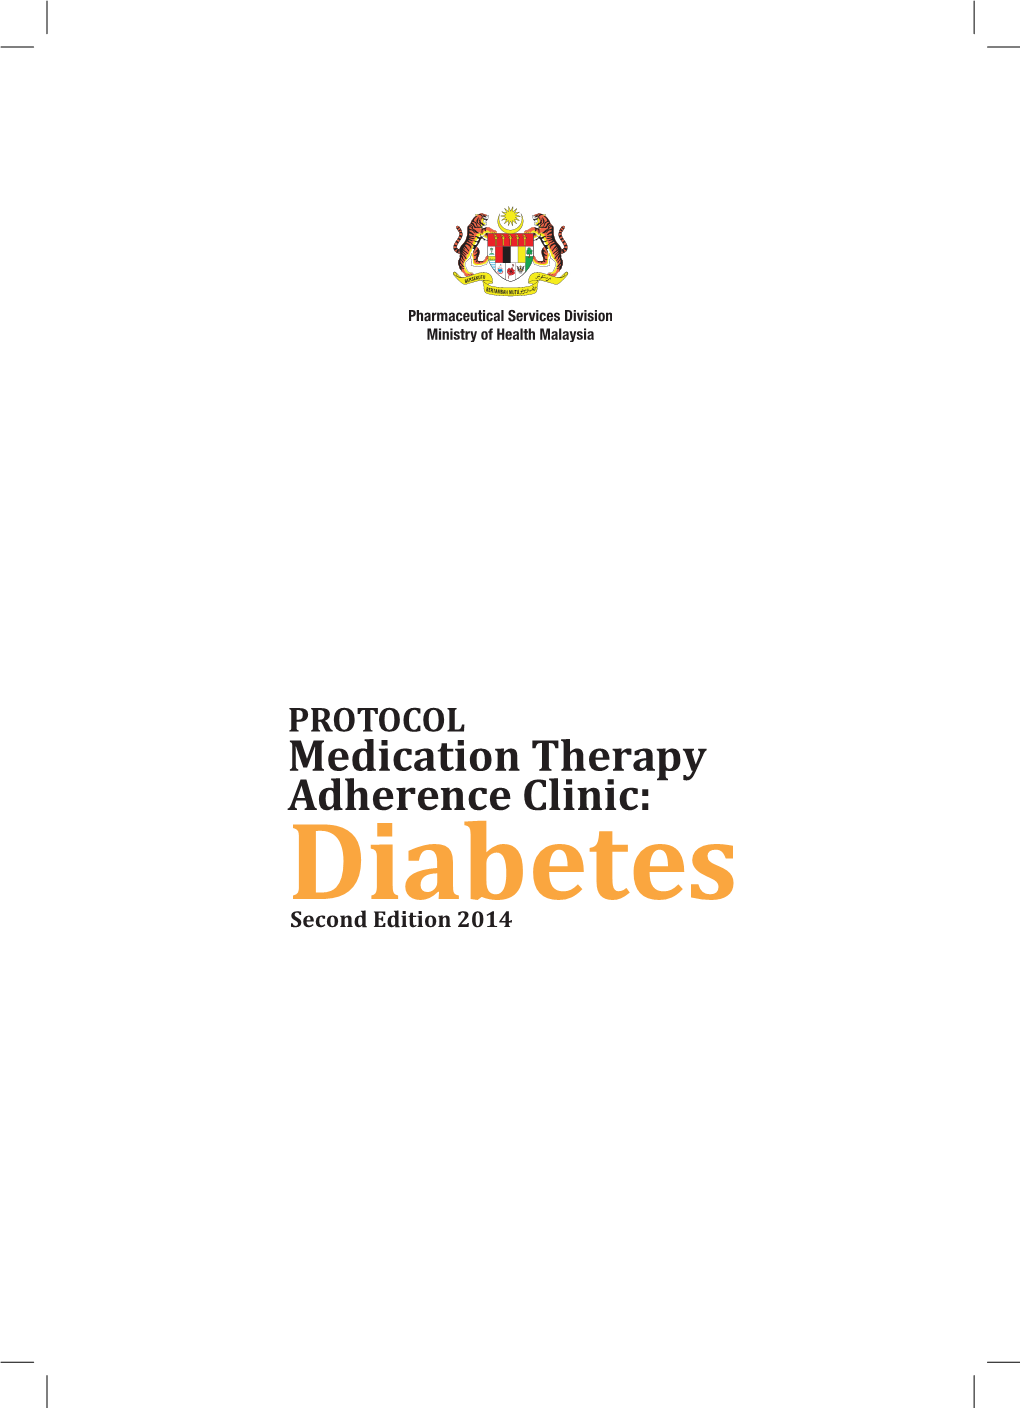 PROTOCOL Medication Therapy Adherence Clinic: Diabetes Second Edition 2014 Second Edition 2014 Pharmaceutical Services Division Ministry of Health, Malaysia